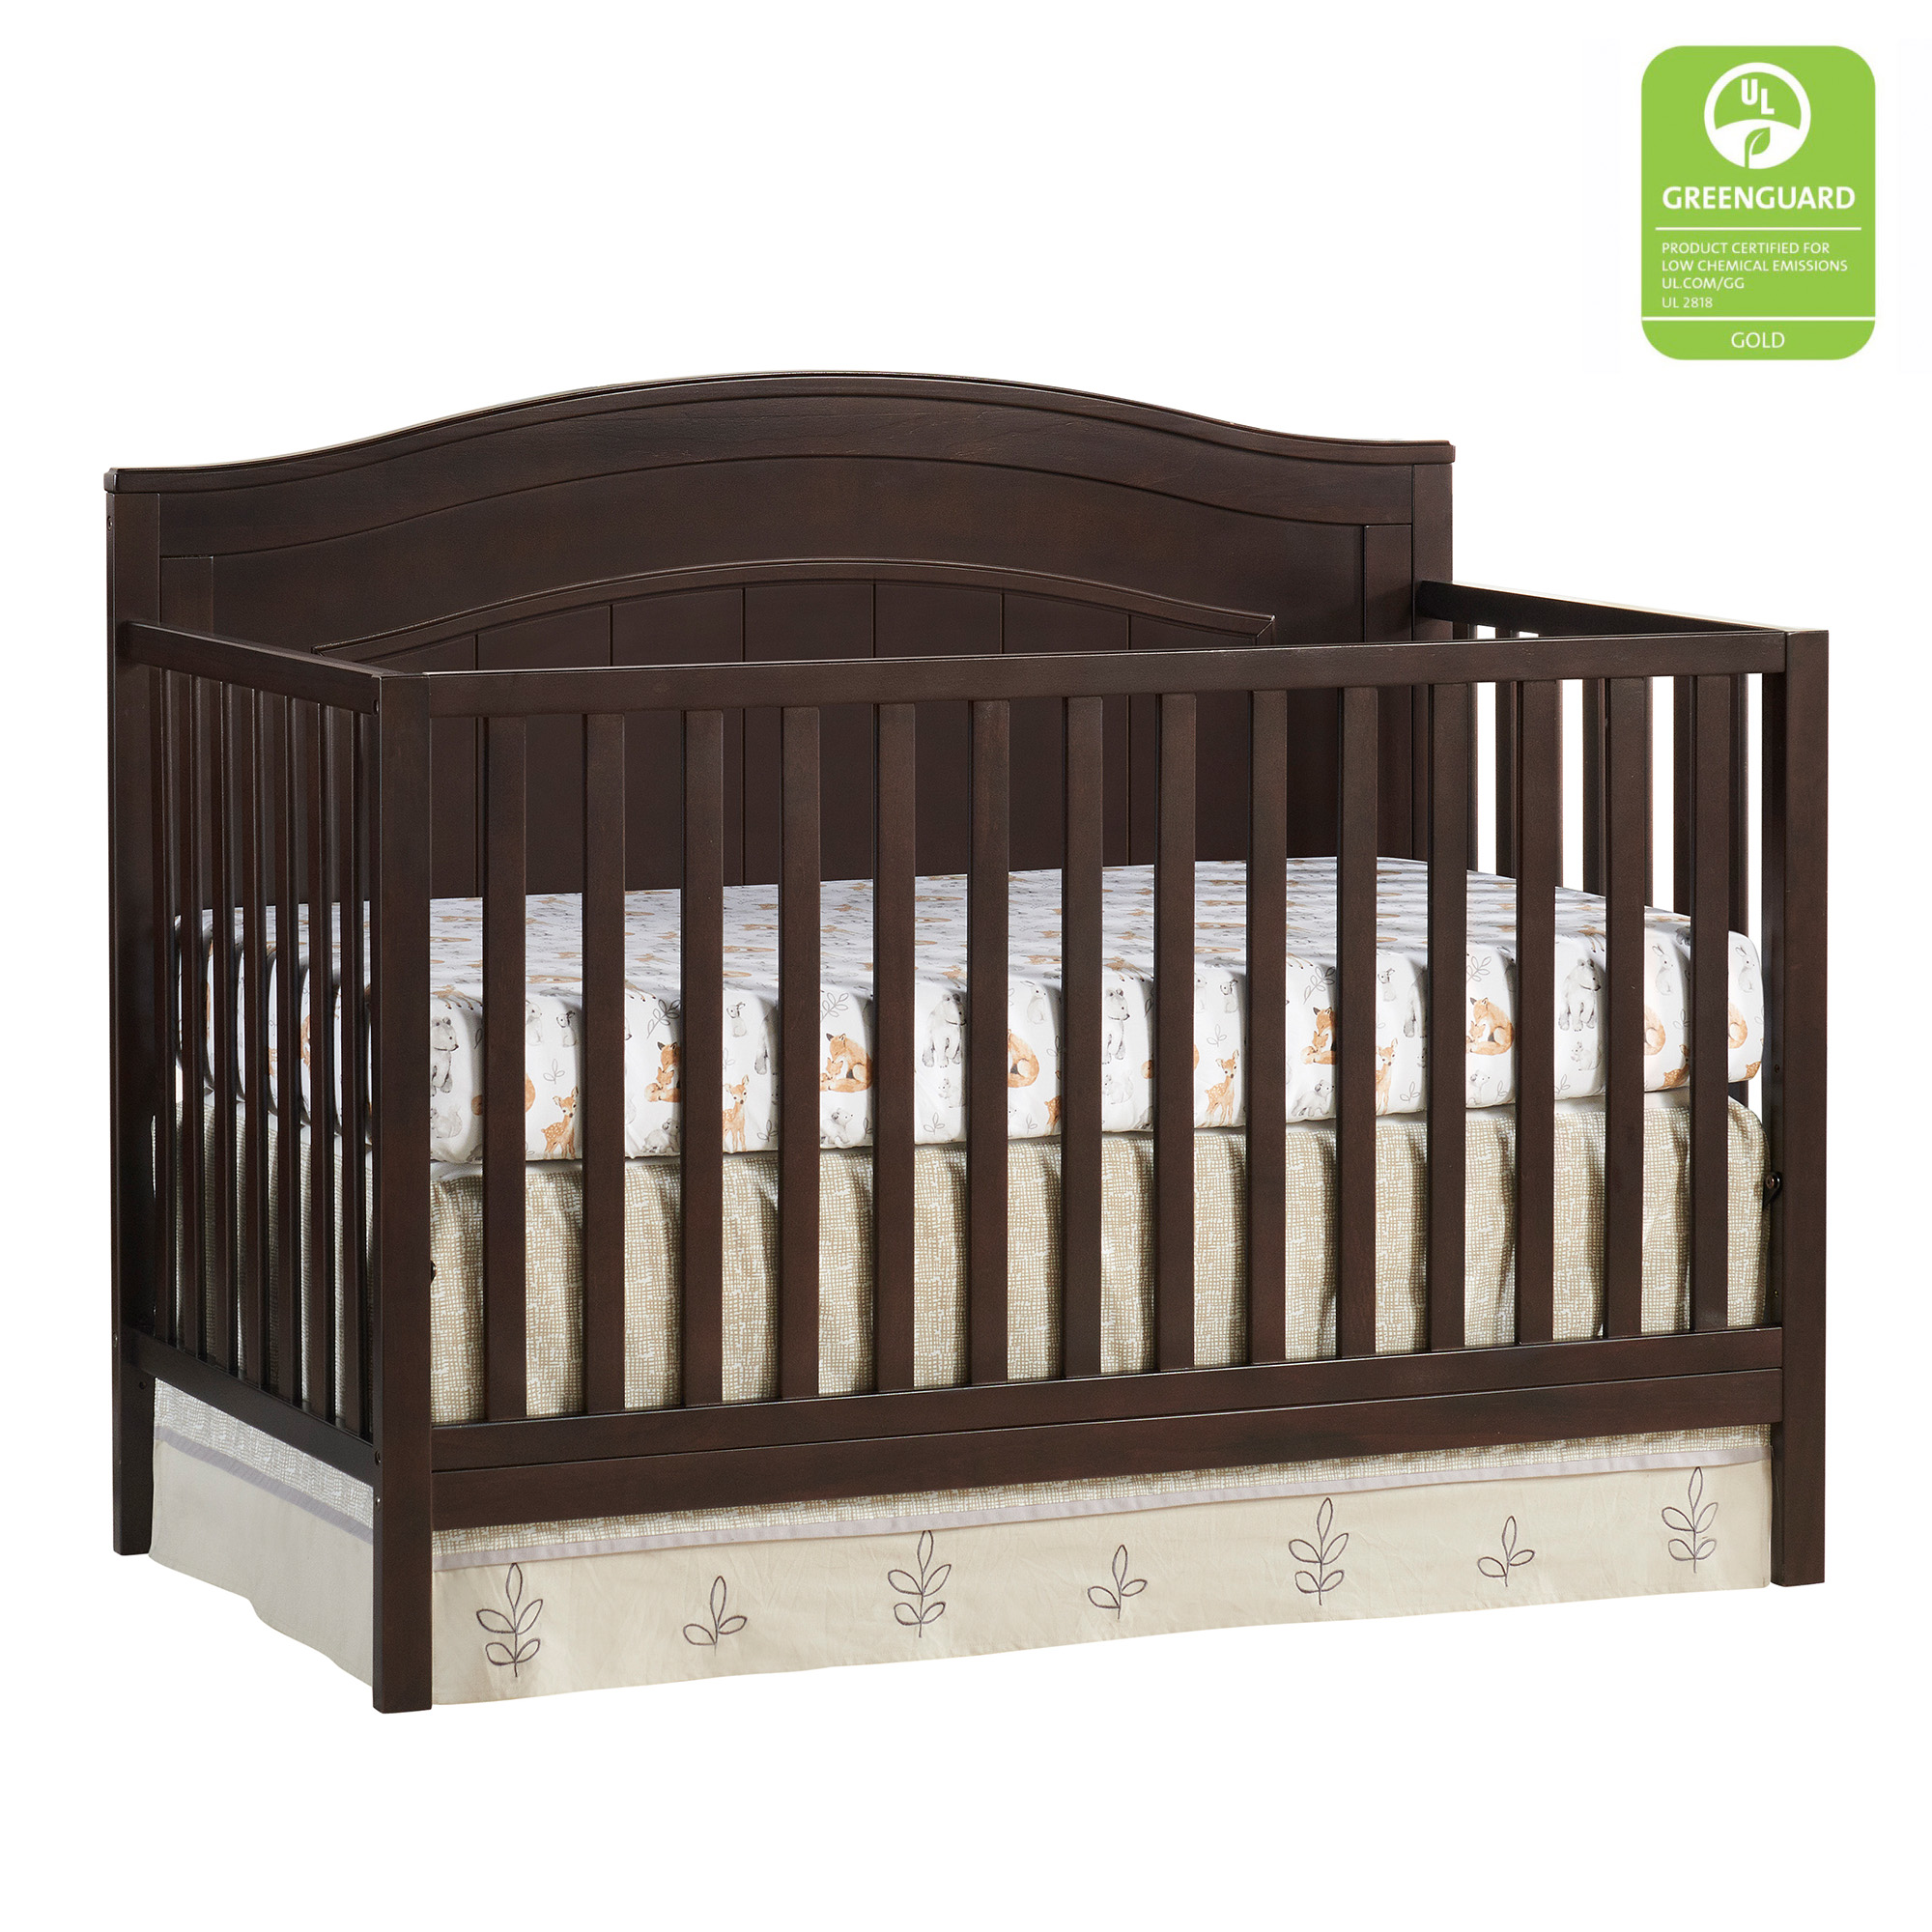 Oxford Baby North Bay 4-in-1 Convertible Crib, Espresso Brown, GREENGUARD Gold Certified - image 1 of 13